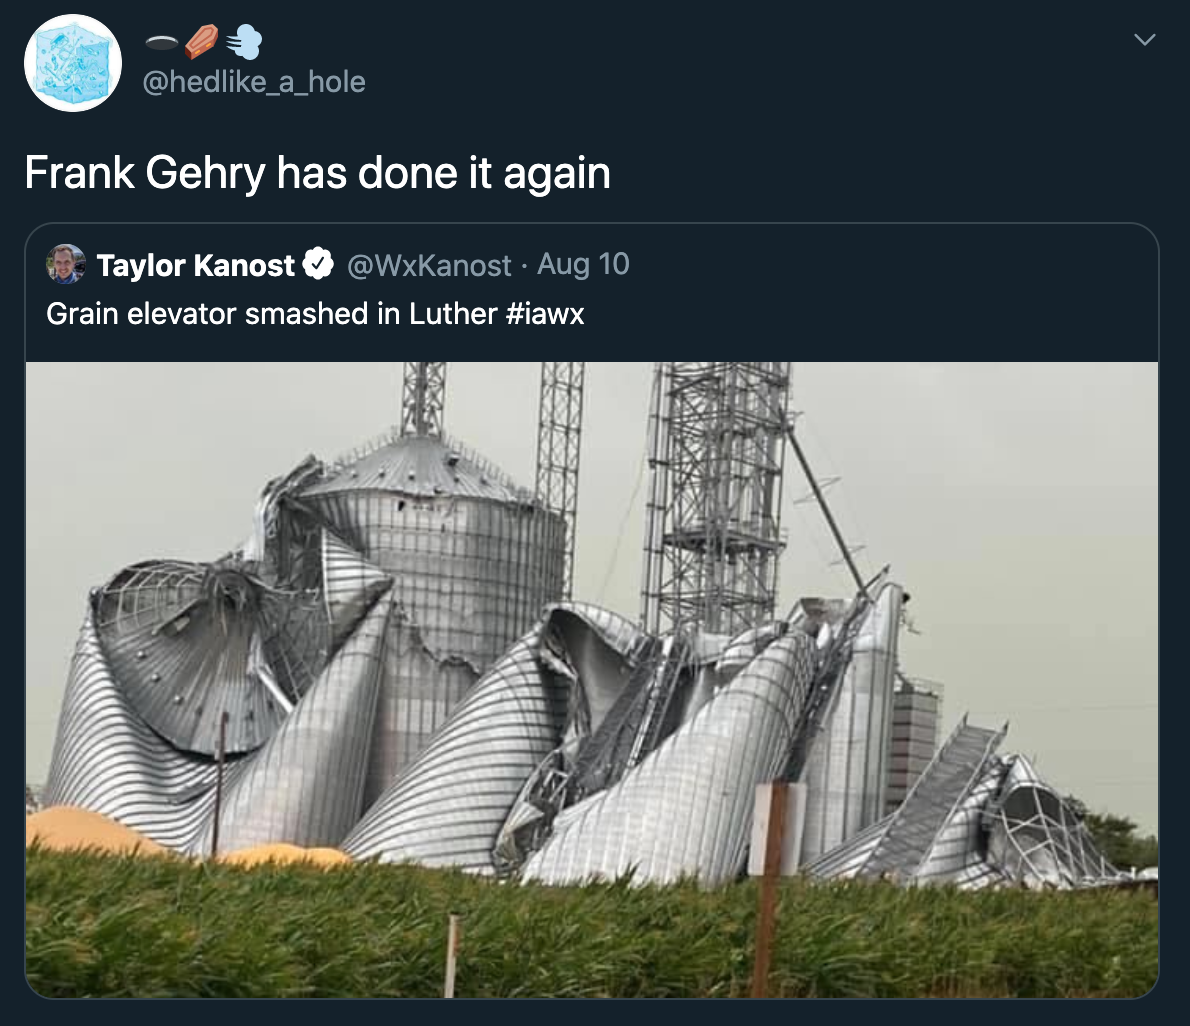 Frank Gehry has done it again - Grain elevator smashed in Luther